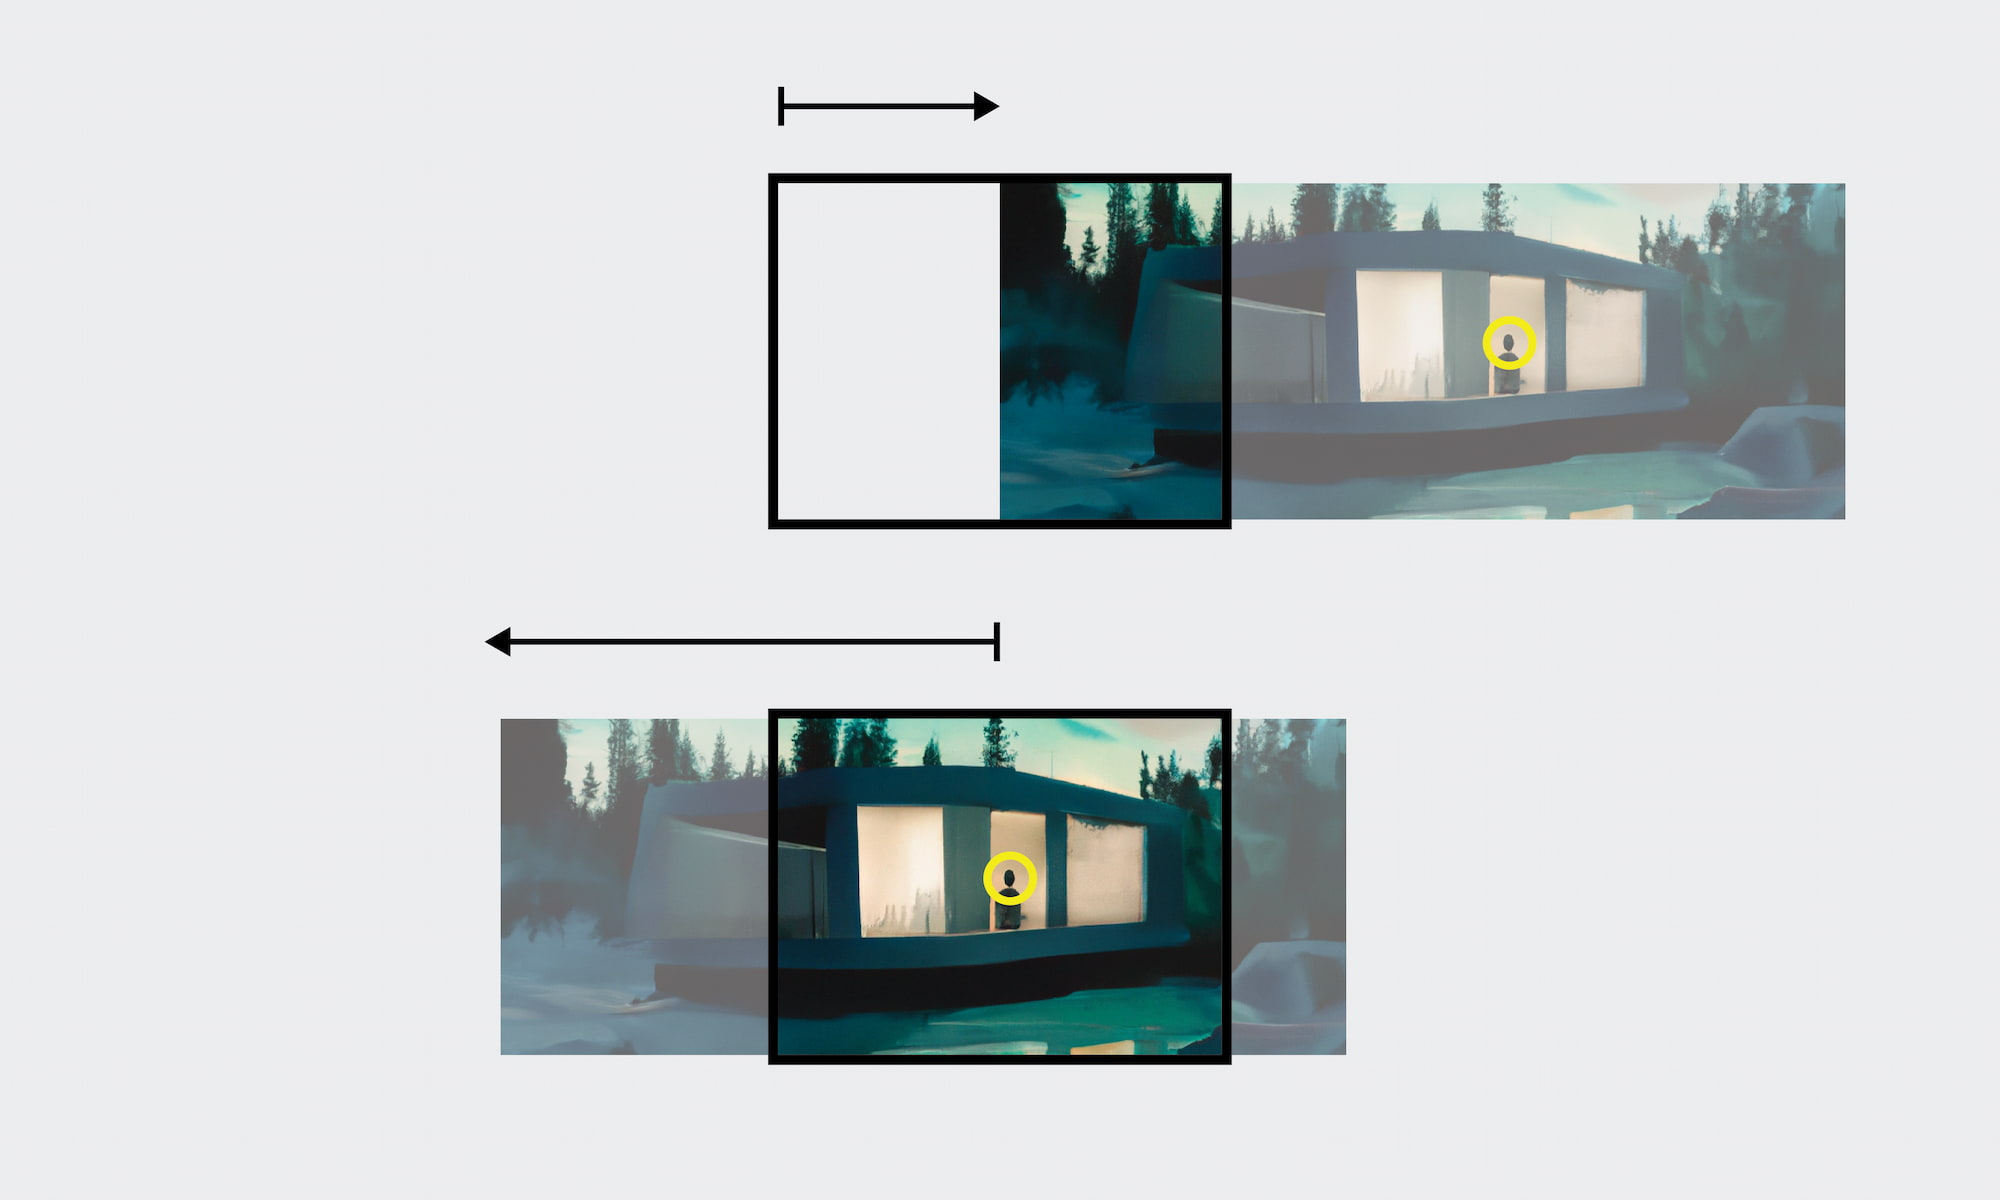 Illustration in two parts. 
            The first part shows the container as a black outline. 
            An arrow that is half the width of the container is pointing to the right. 
            An image below the container is shifted this amount to the right so that the left image edge is in the center of the container.
            The second part shows the container as a black outline. 
            An arrow that is half the width of the image is pointing to the left. 
            The image below is now shifted this amount to the left so that the focal point marked with a yellow circle ends up in the center of the container.